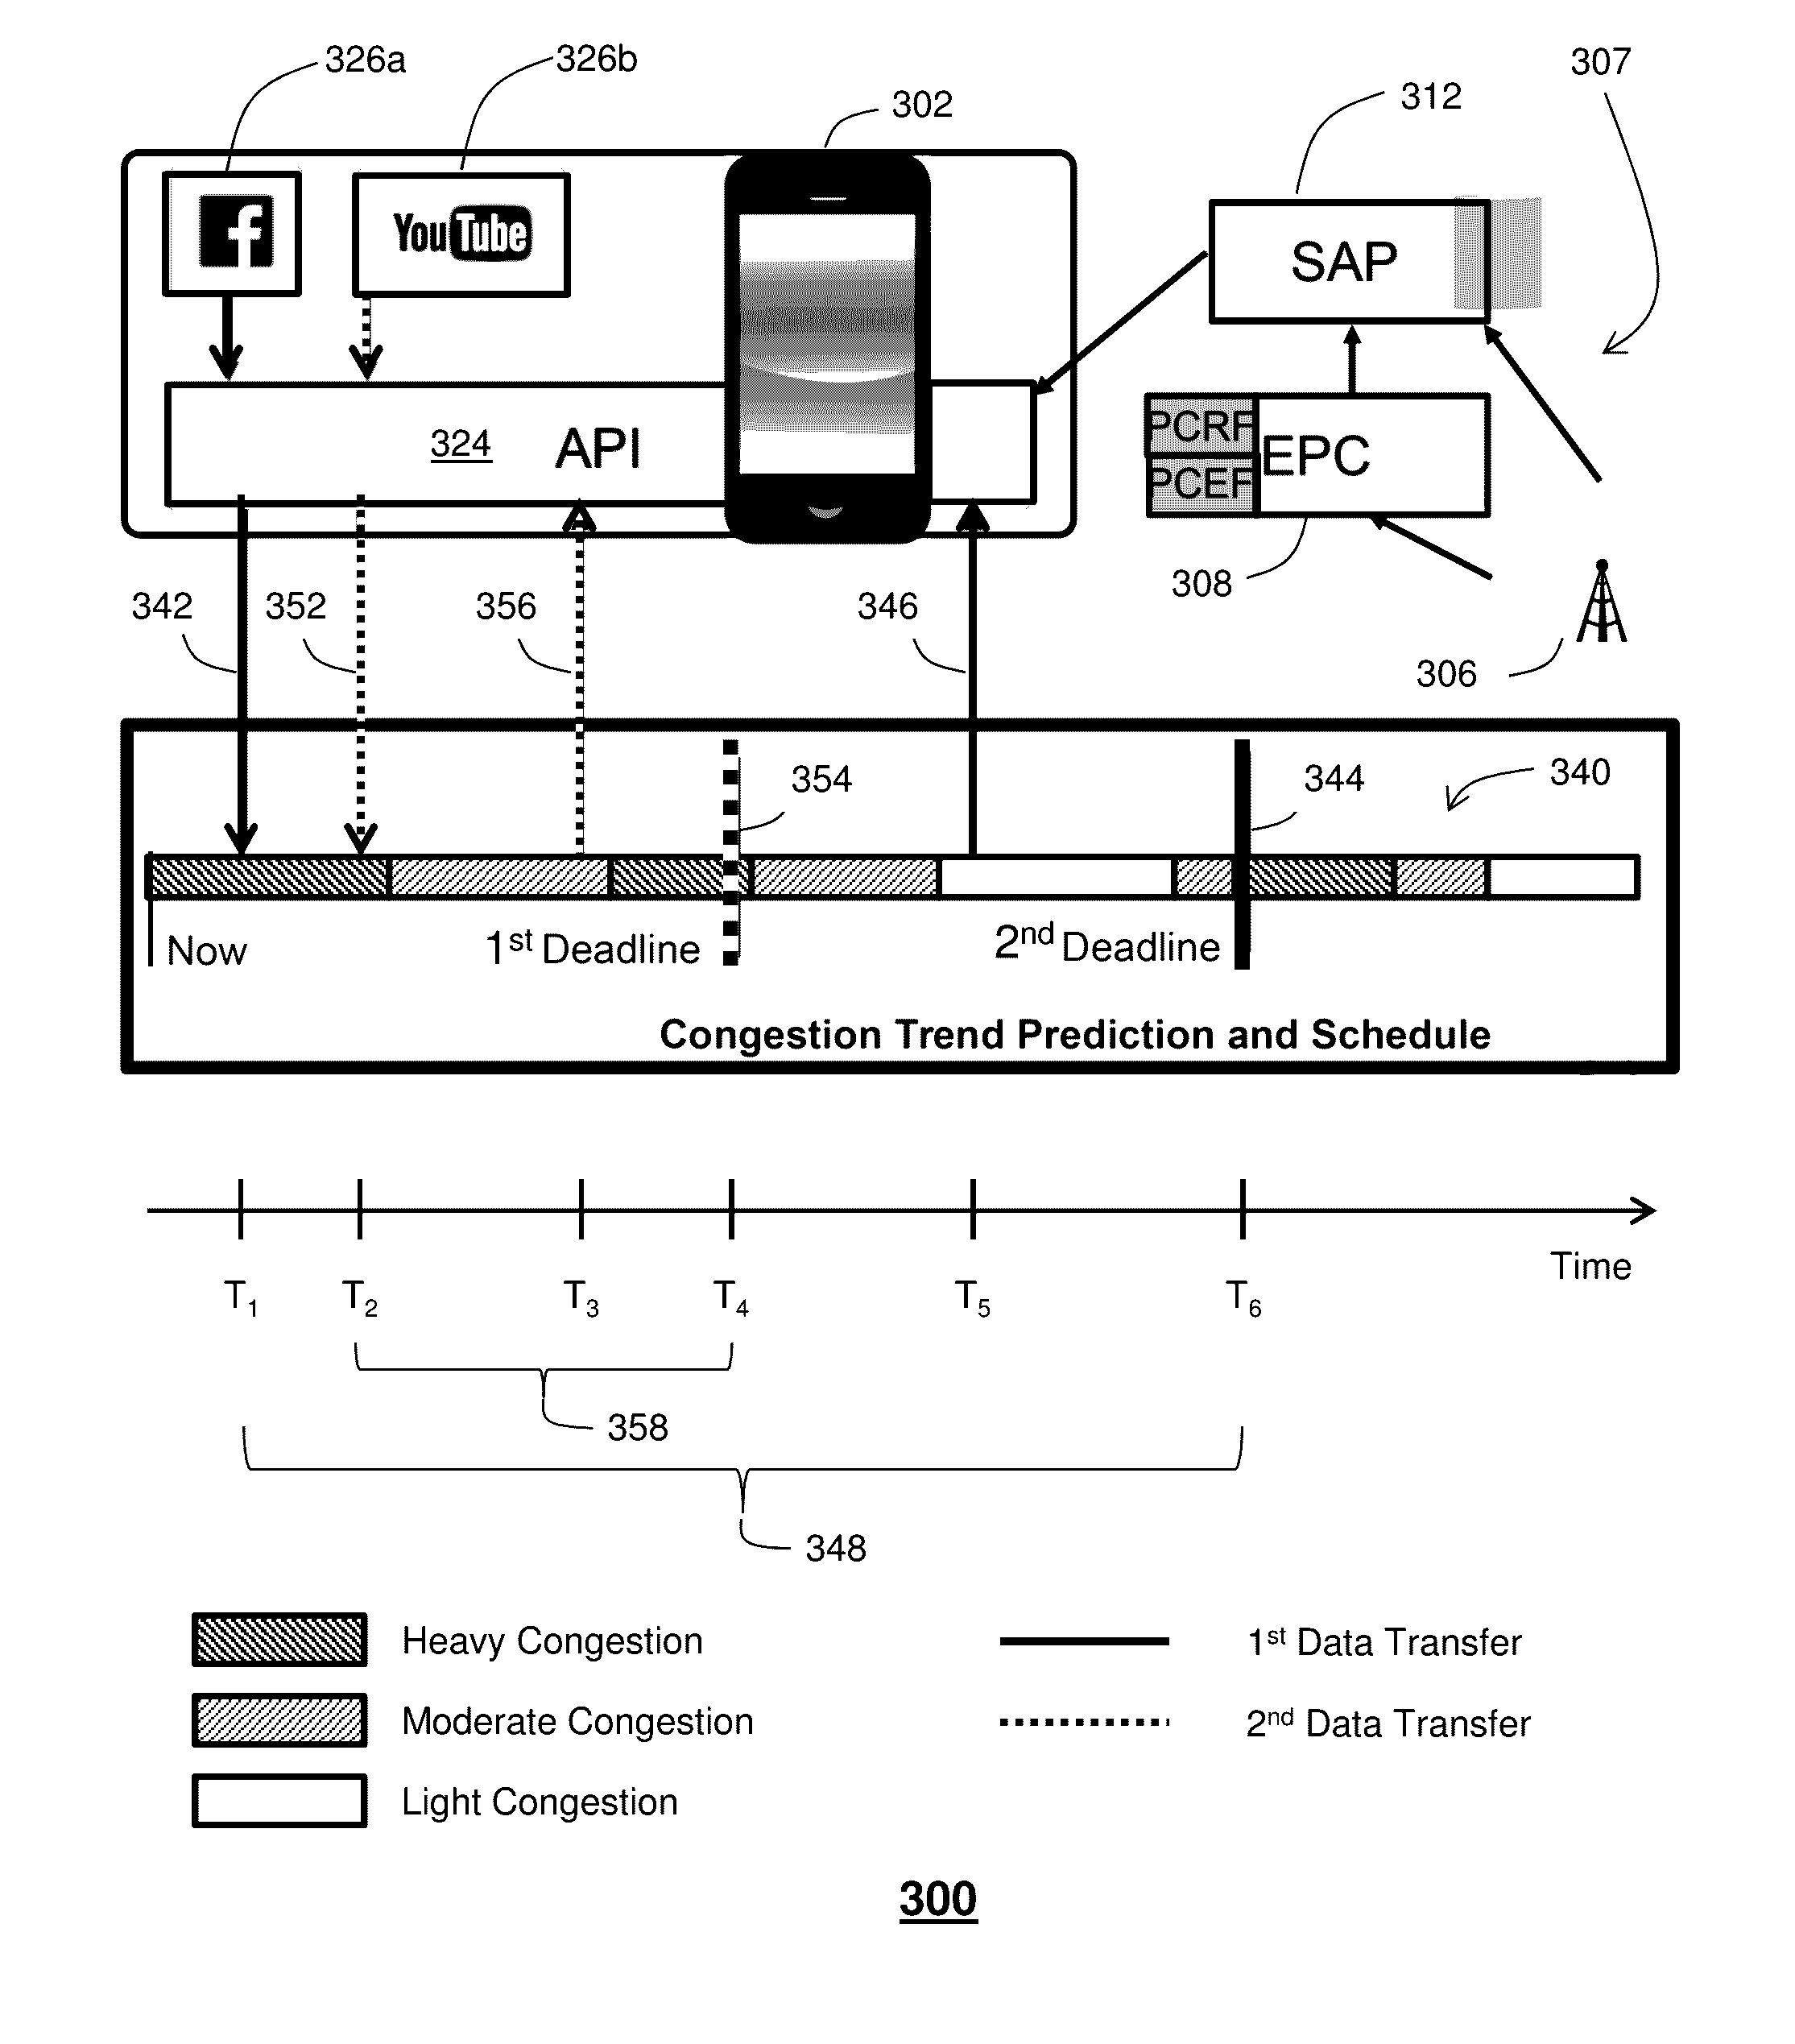 System and method for scheduling time-shifting traffic in a mobile cellular network